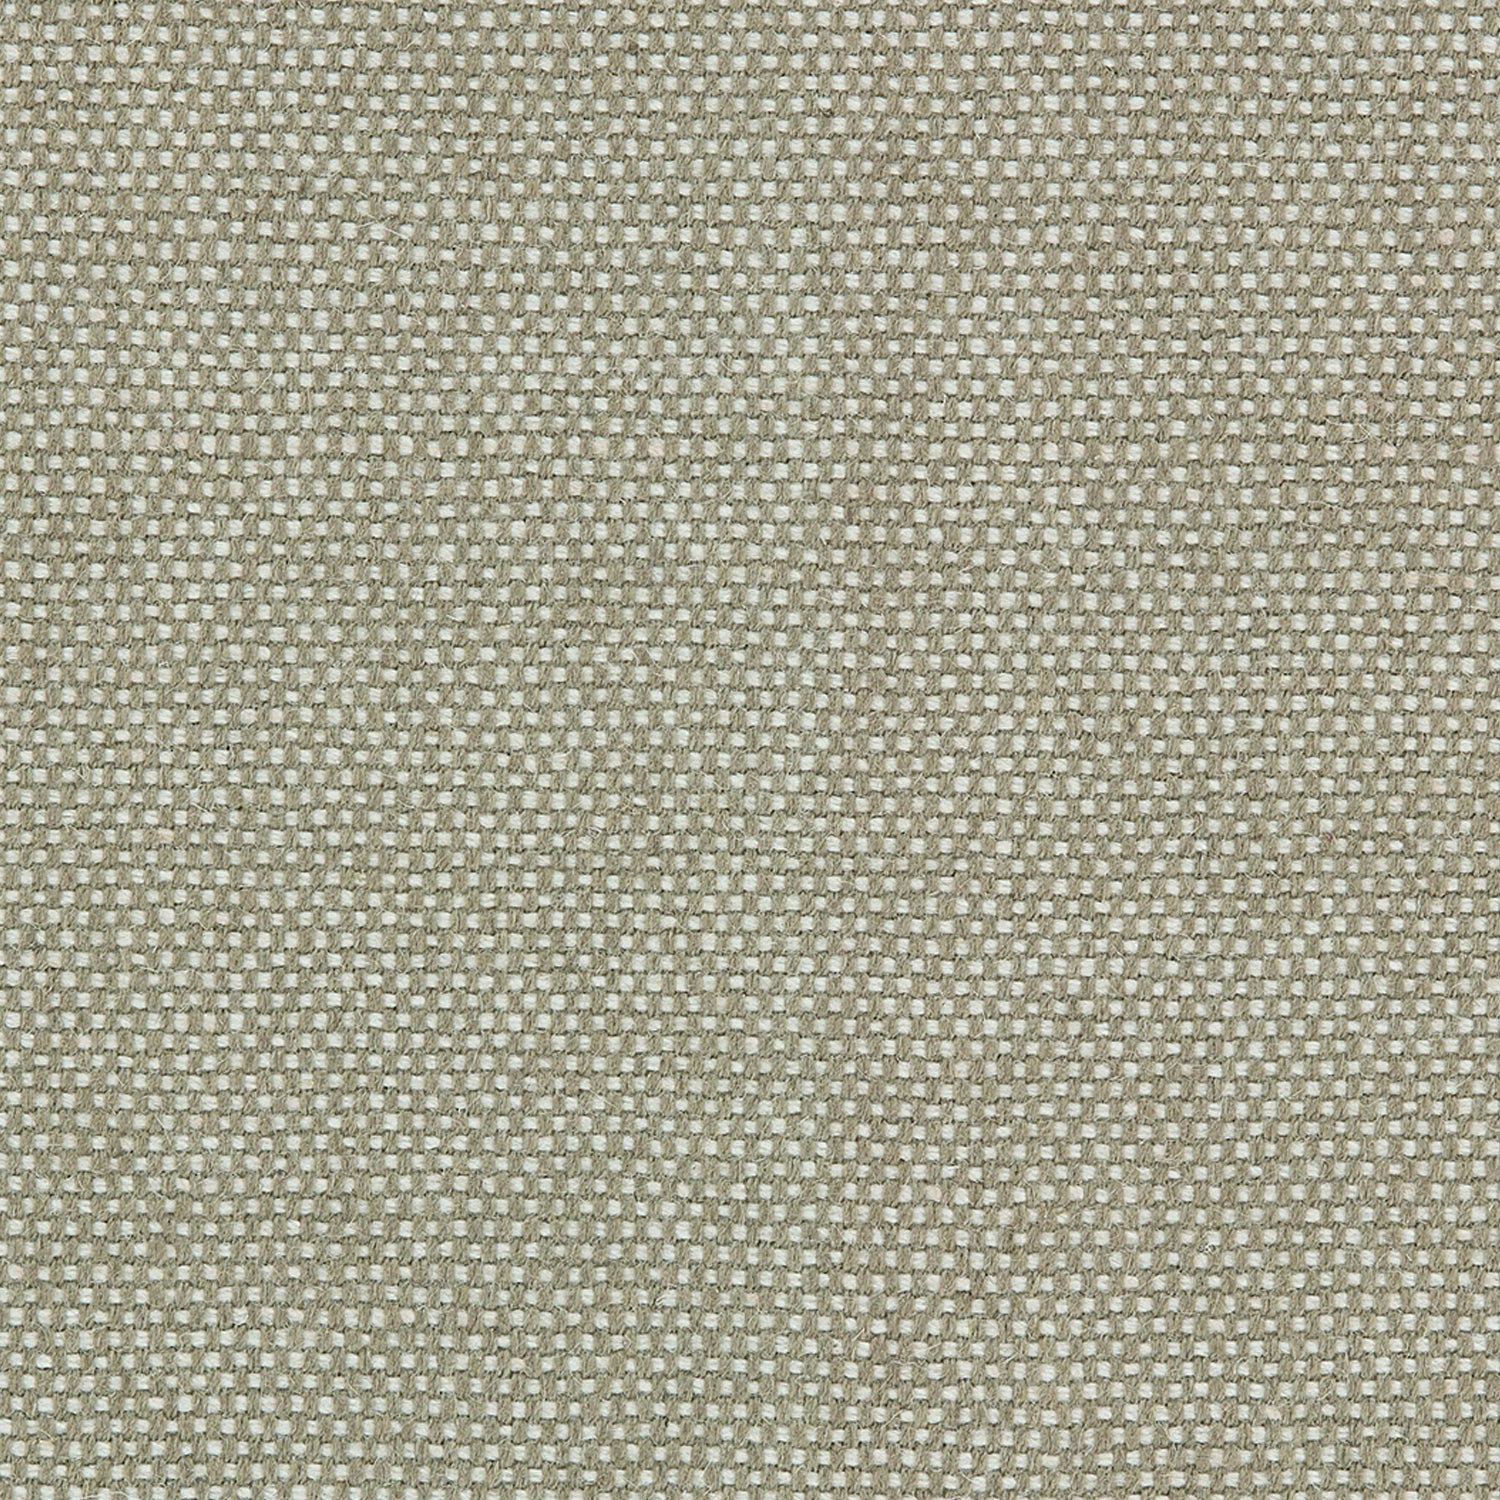 Wool broadloom carpet swatch in a flat grid weave in sage and white.